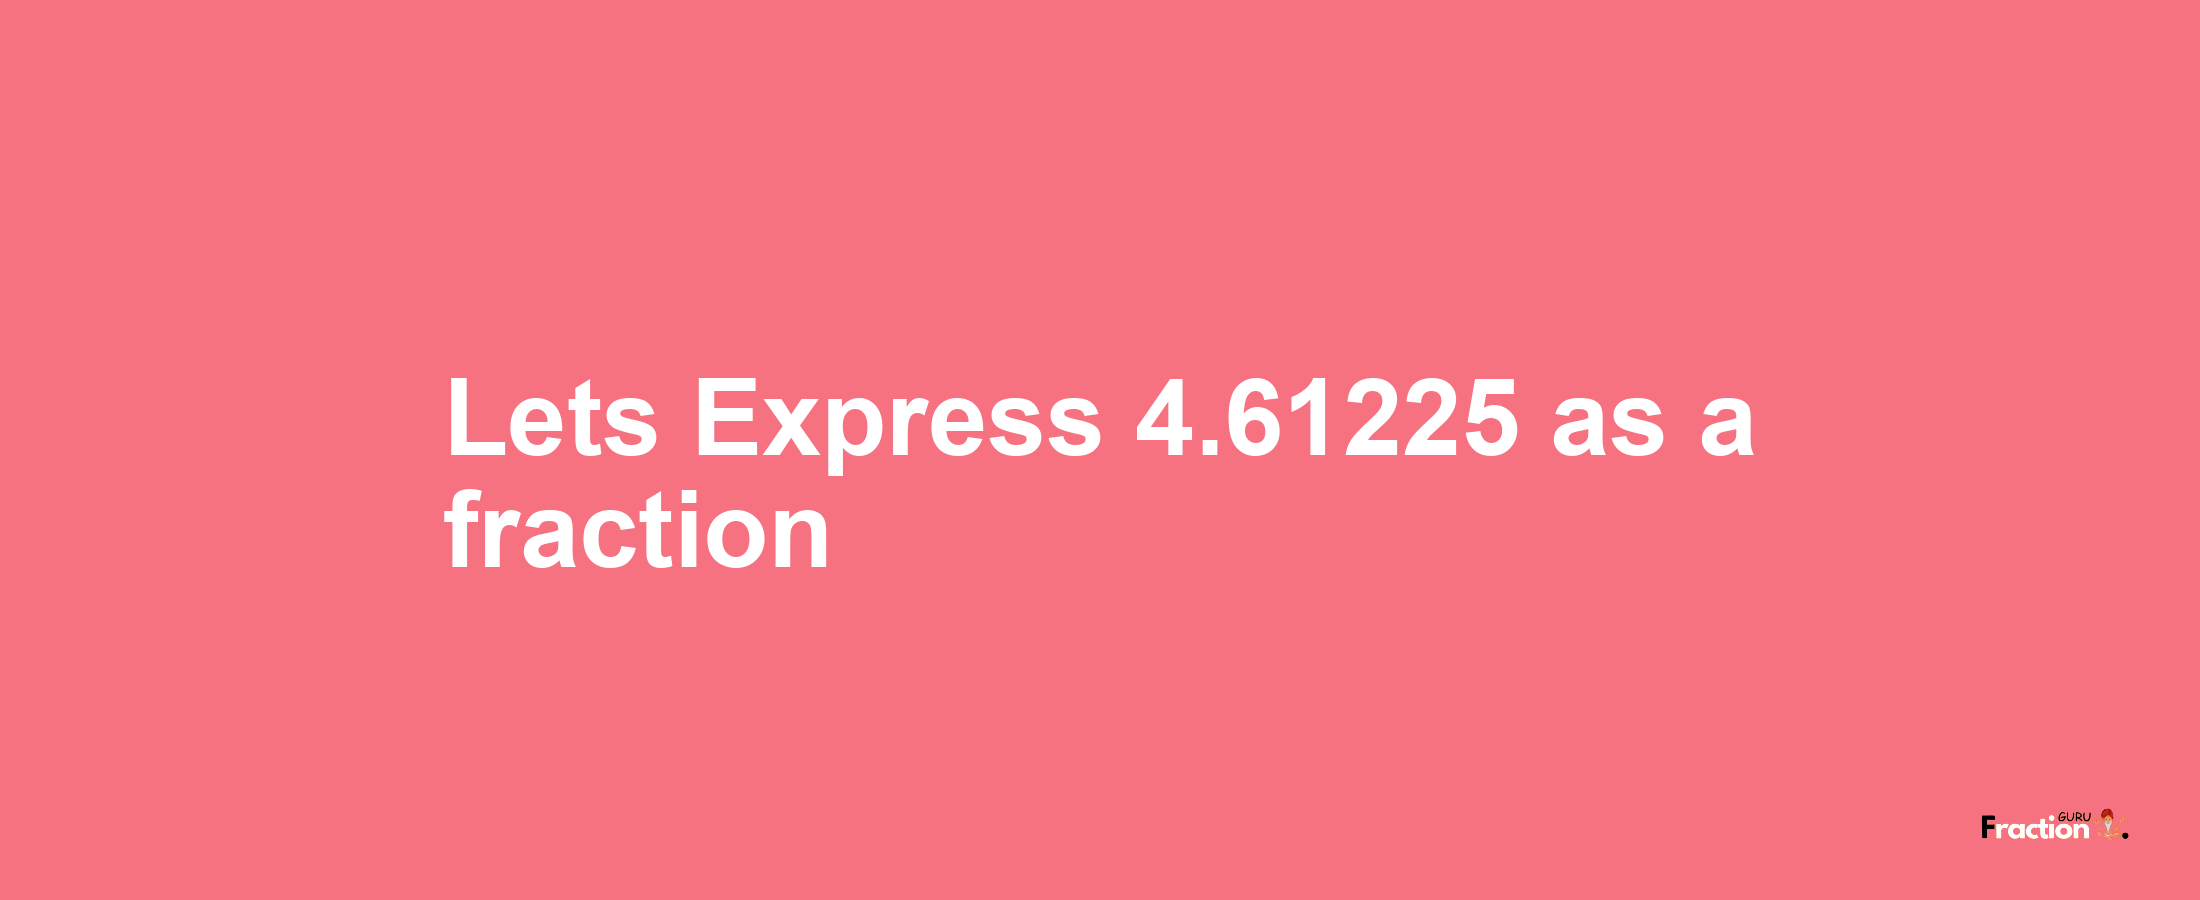 Lets Express 4.61225 as afraction